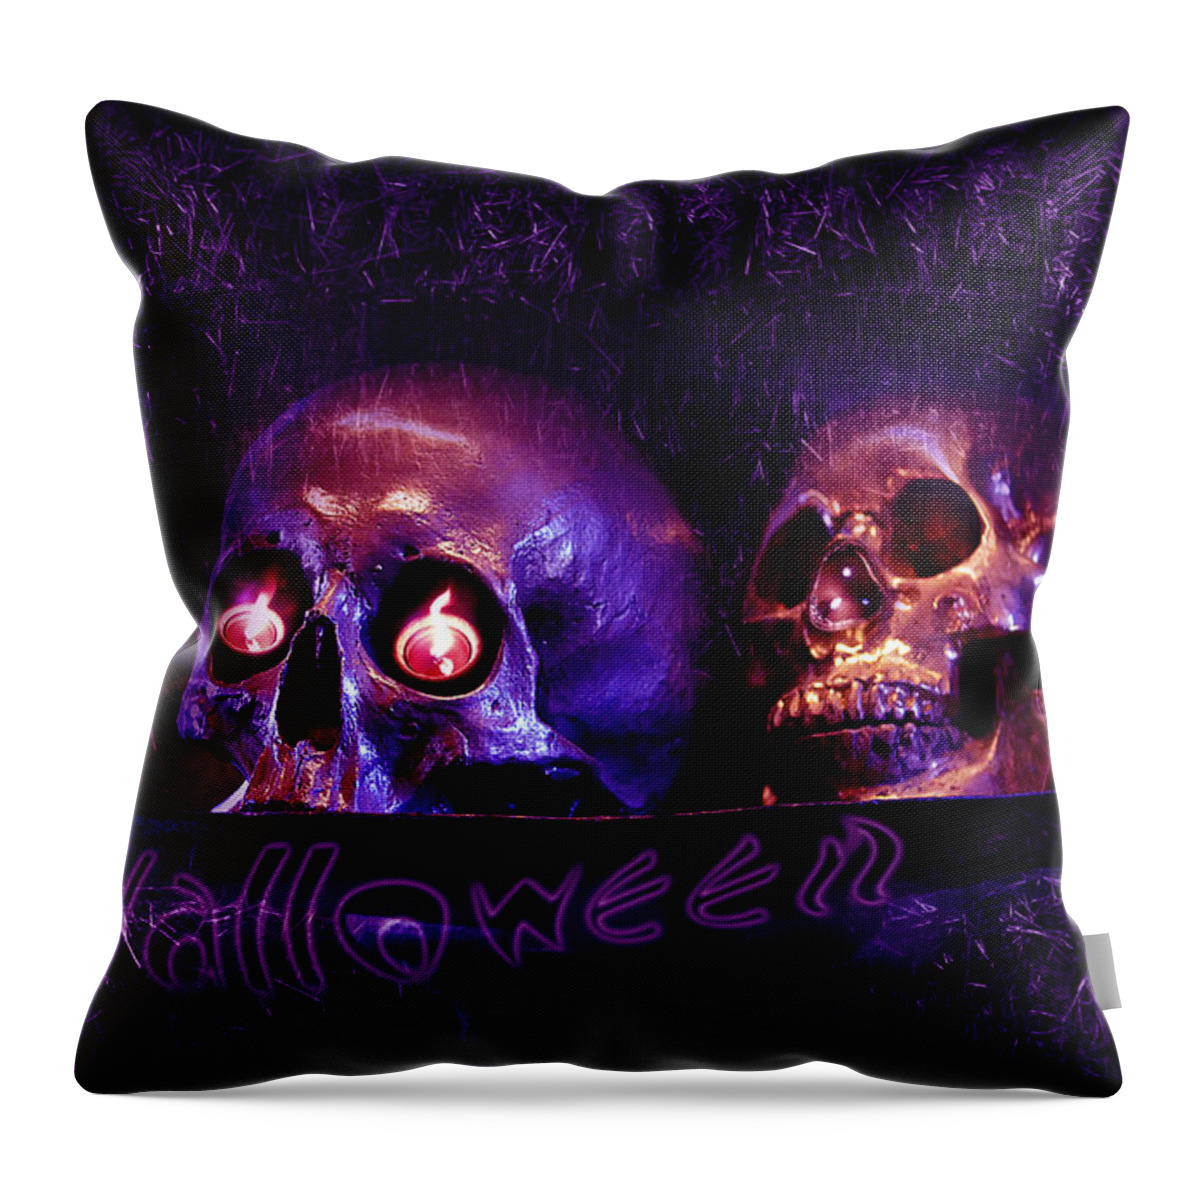 Night Of The Dead Throw Pillow featuring the digital art Halloween Party by Xueling Zou